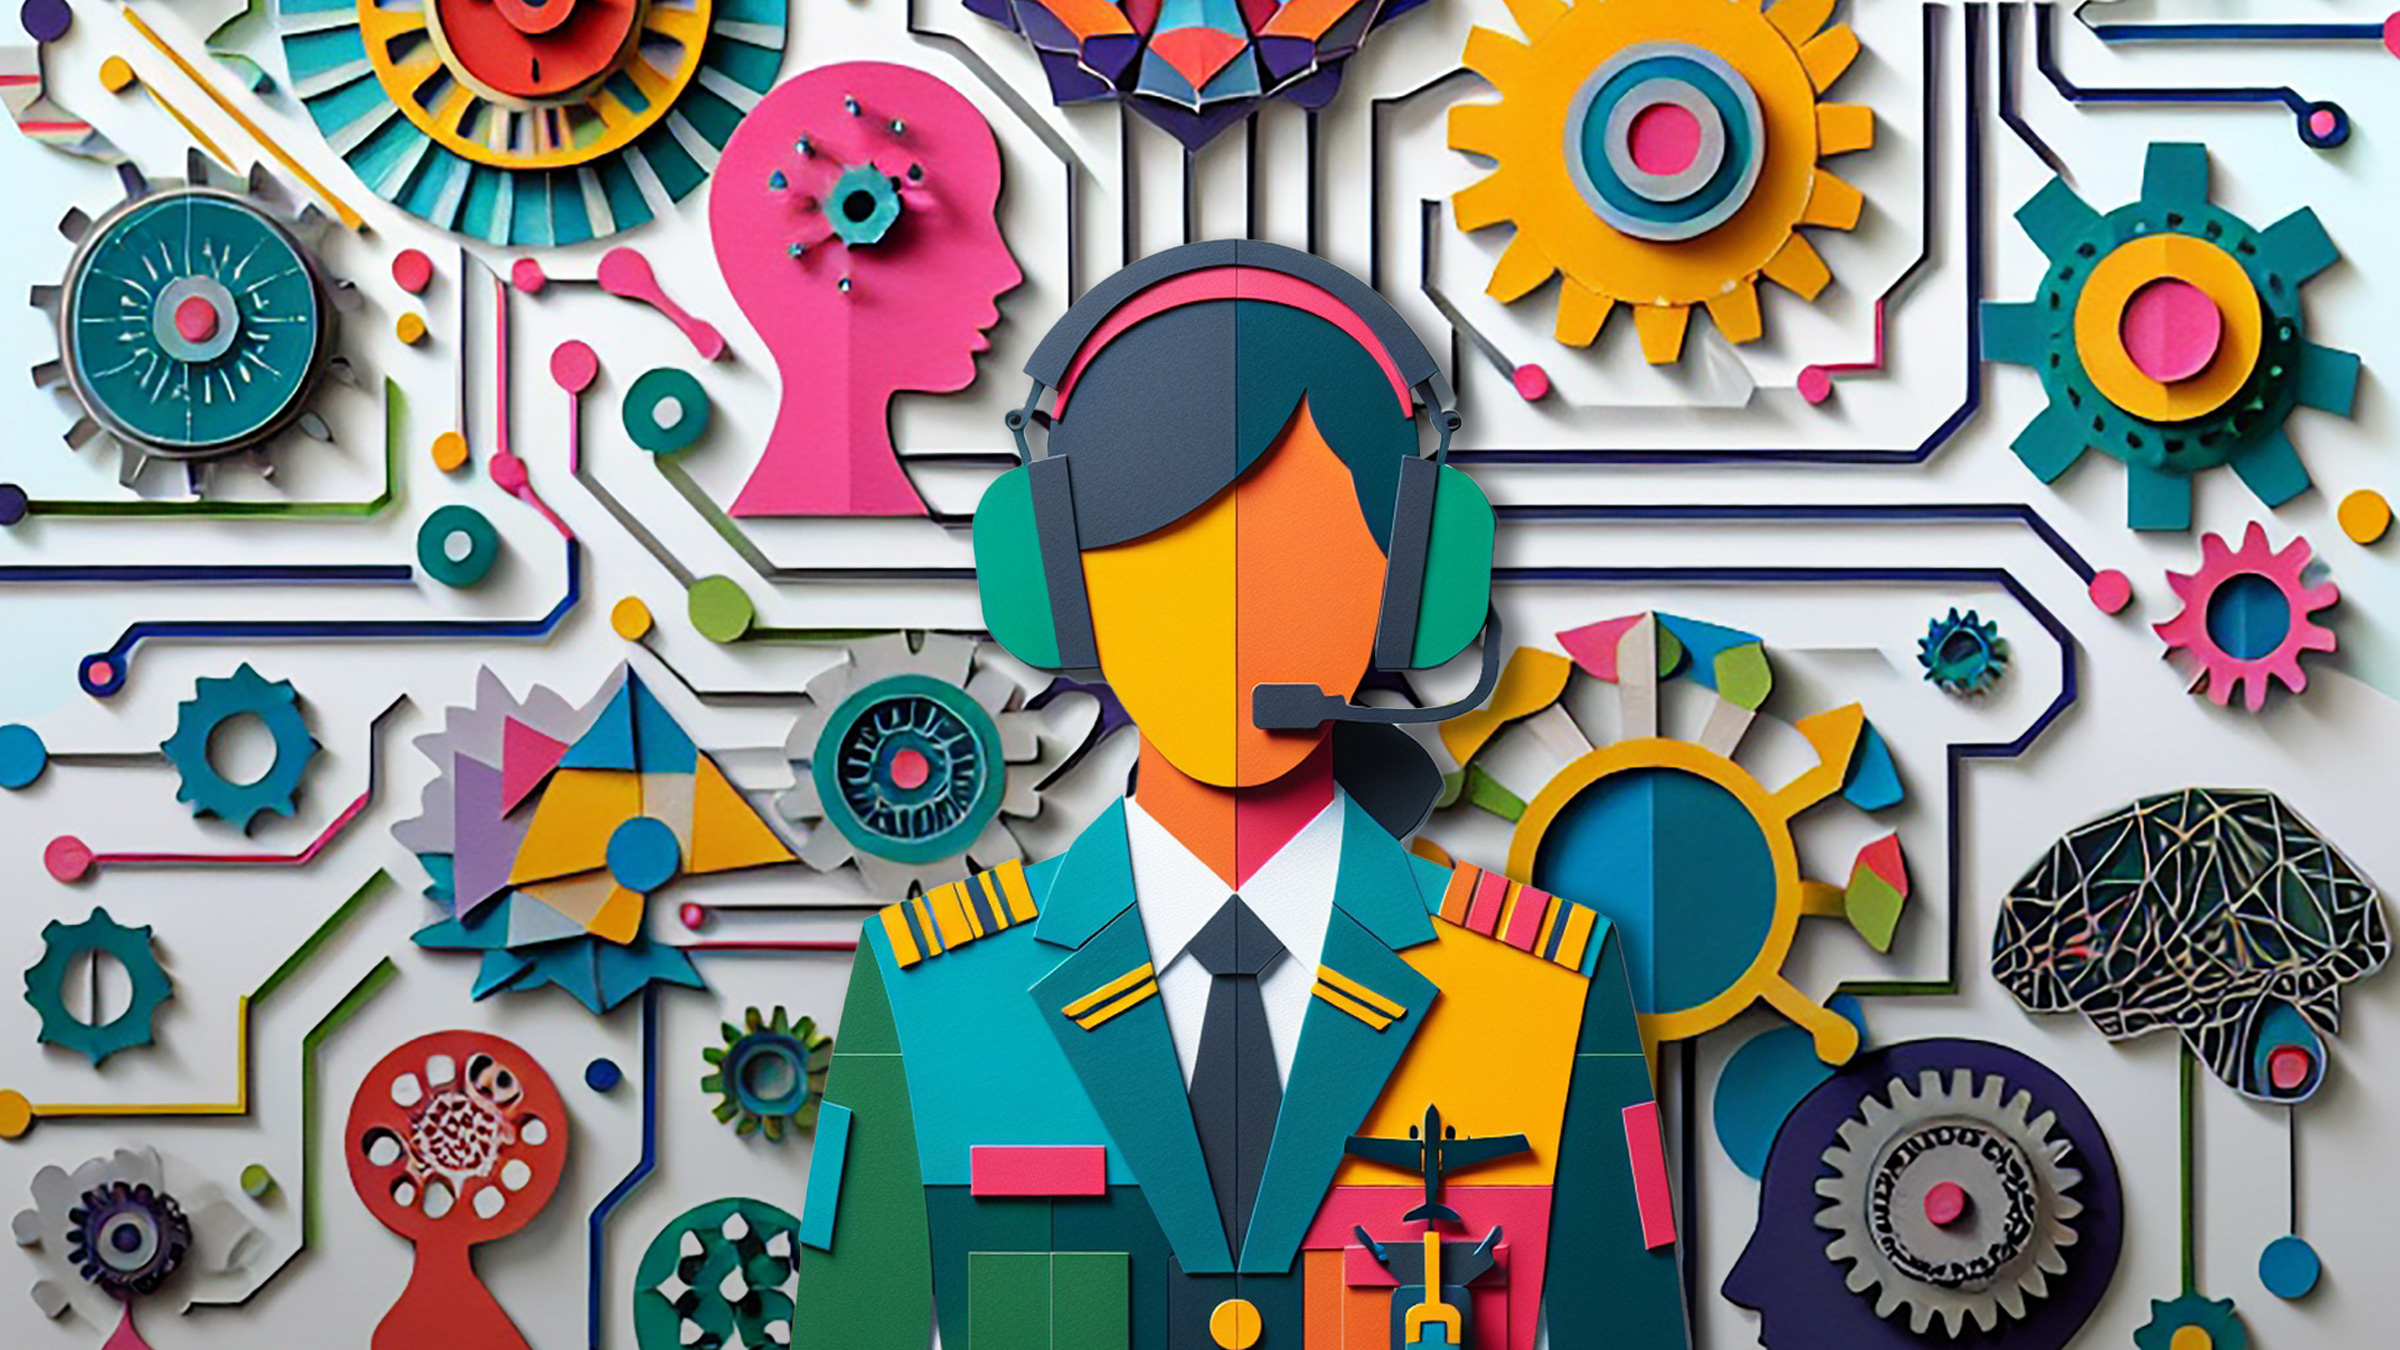 pilot in headset and uniform, surrounded by colorful gear icons, illustration